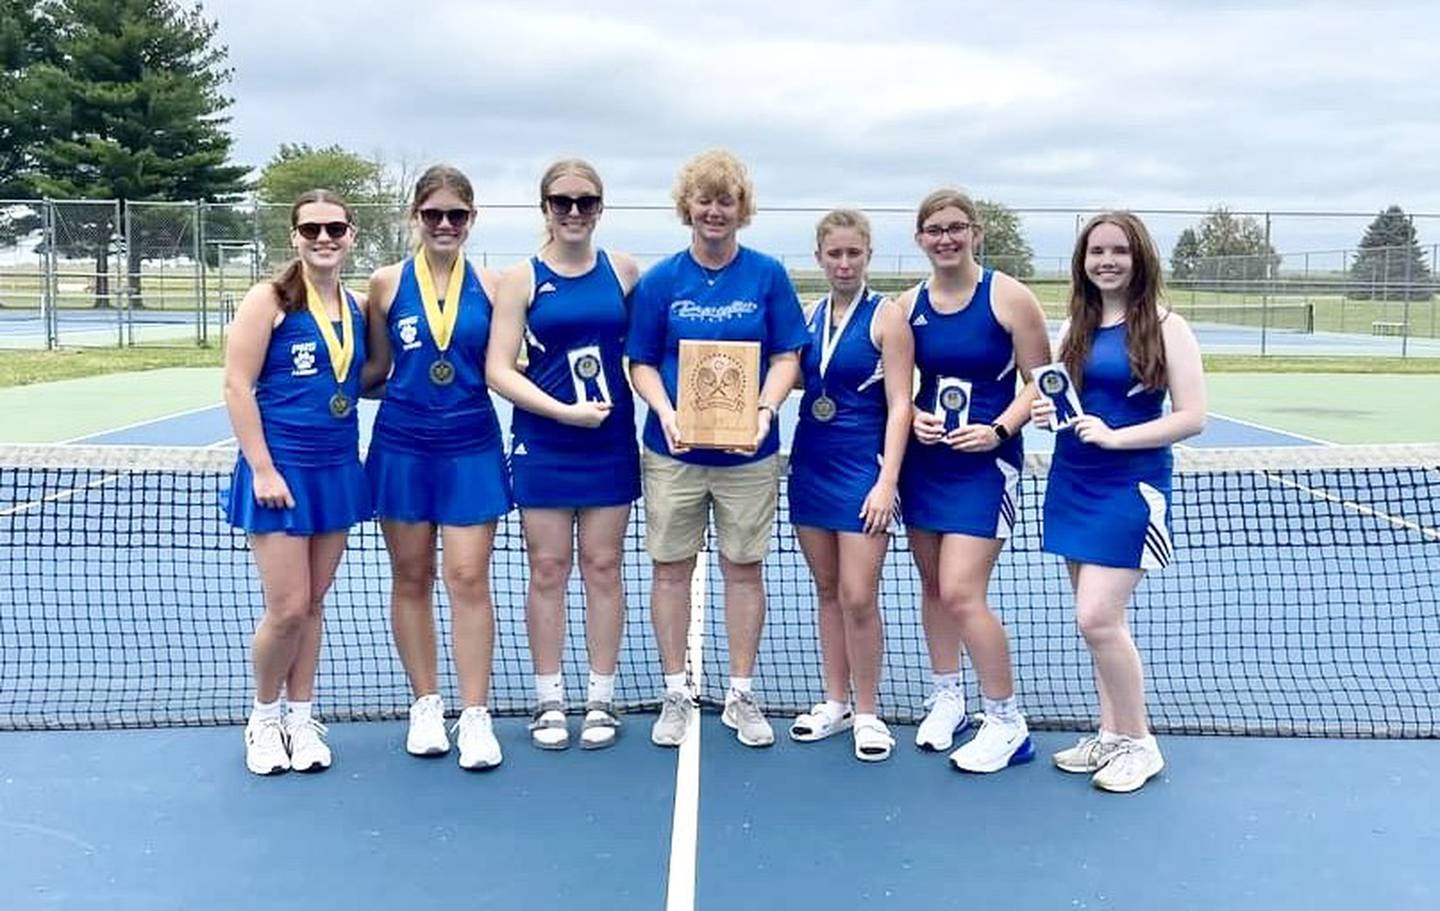 Princeton won Saturday's Newman JV invite with a clean sweep by Caitlin Meyer (from left), Abby Brown, Gracie Andersen, Audrey Thompson, Anika Hanson and Tessa Carlson.